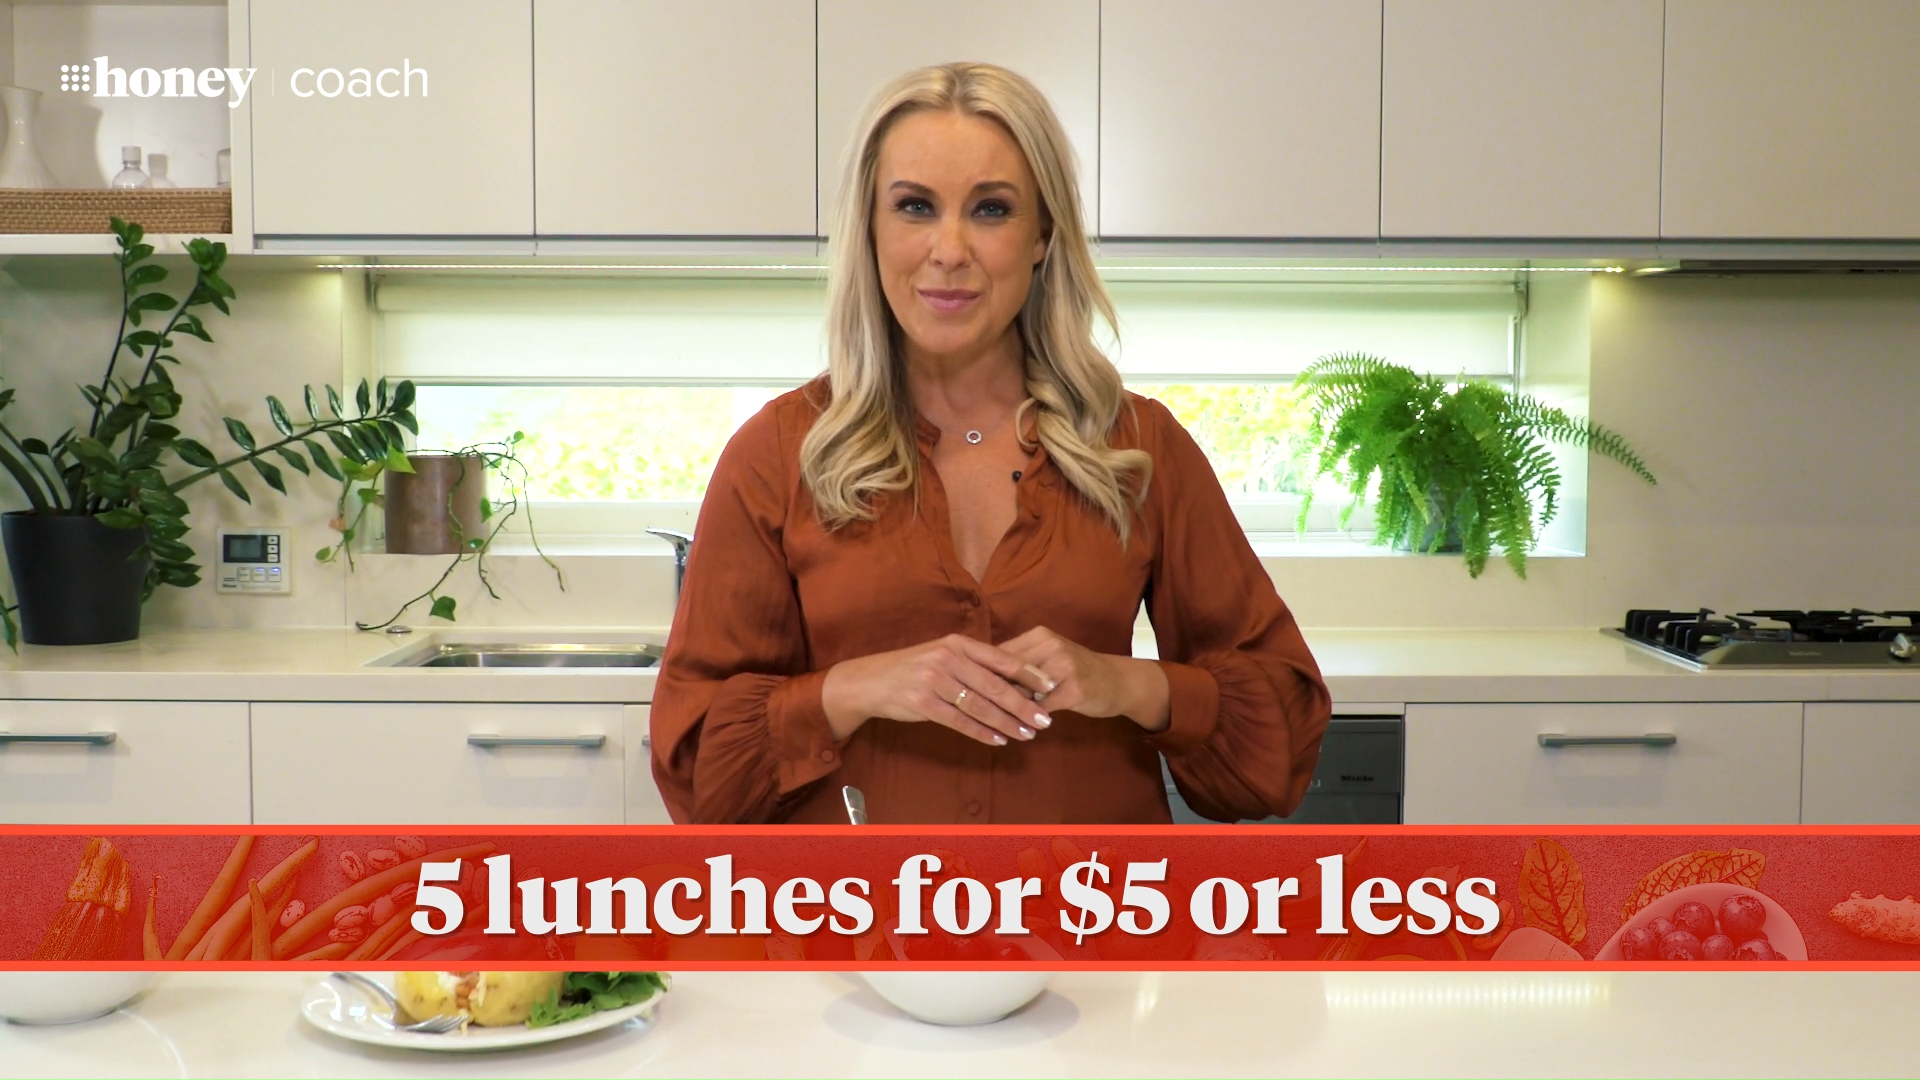  Five healthy lunches for under $5